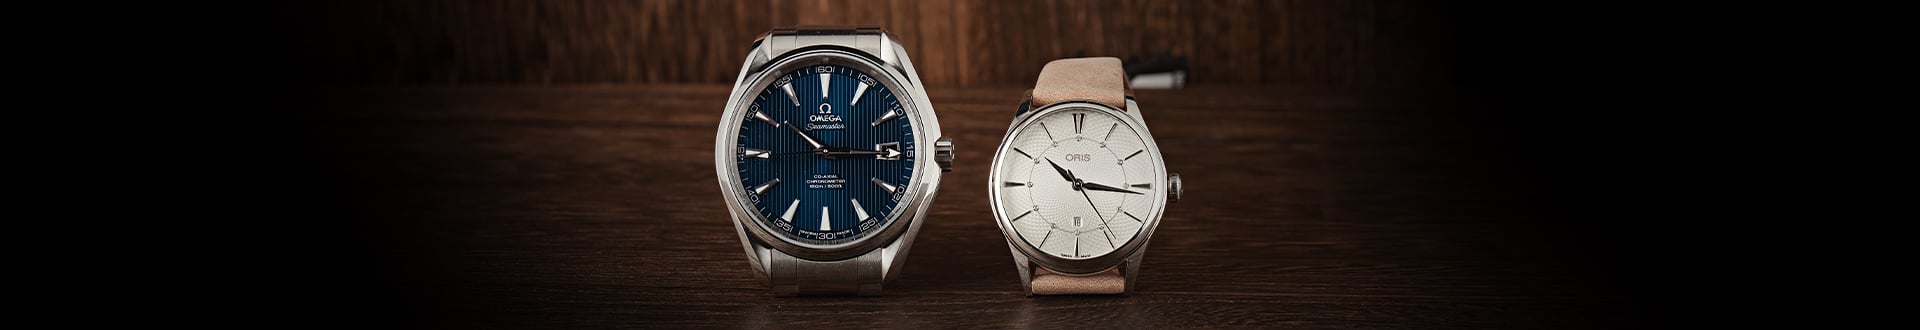 Oris vs Omega Watches: Which Should You Invest In